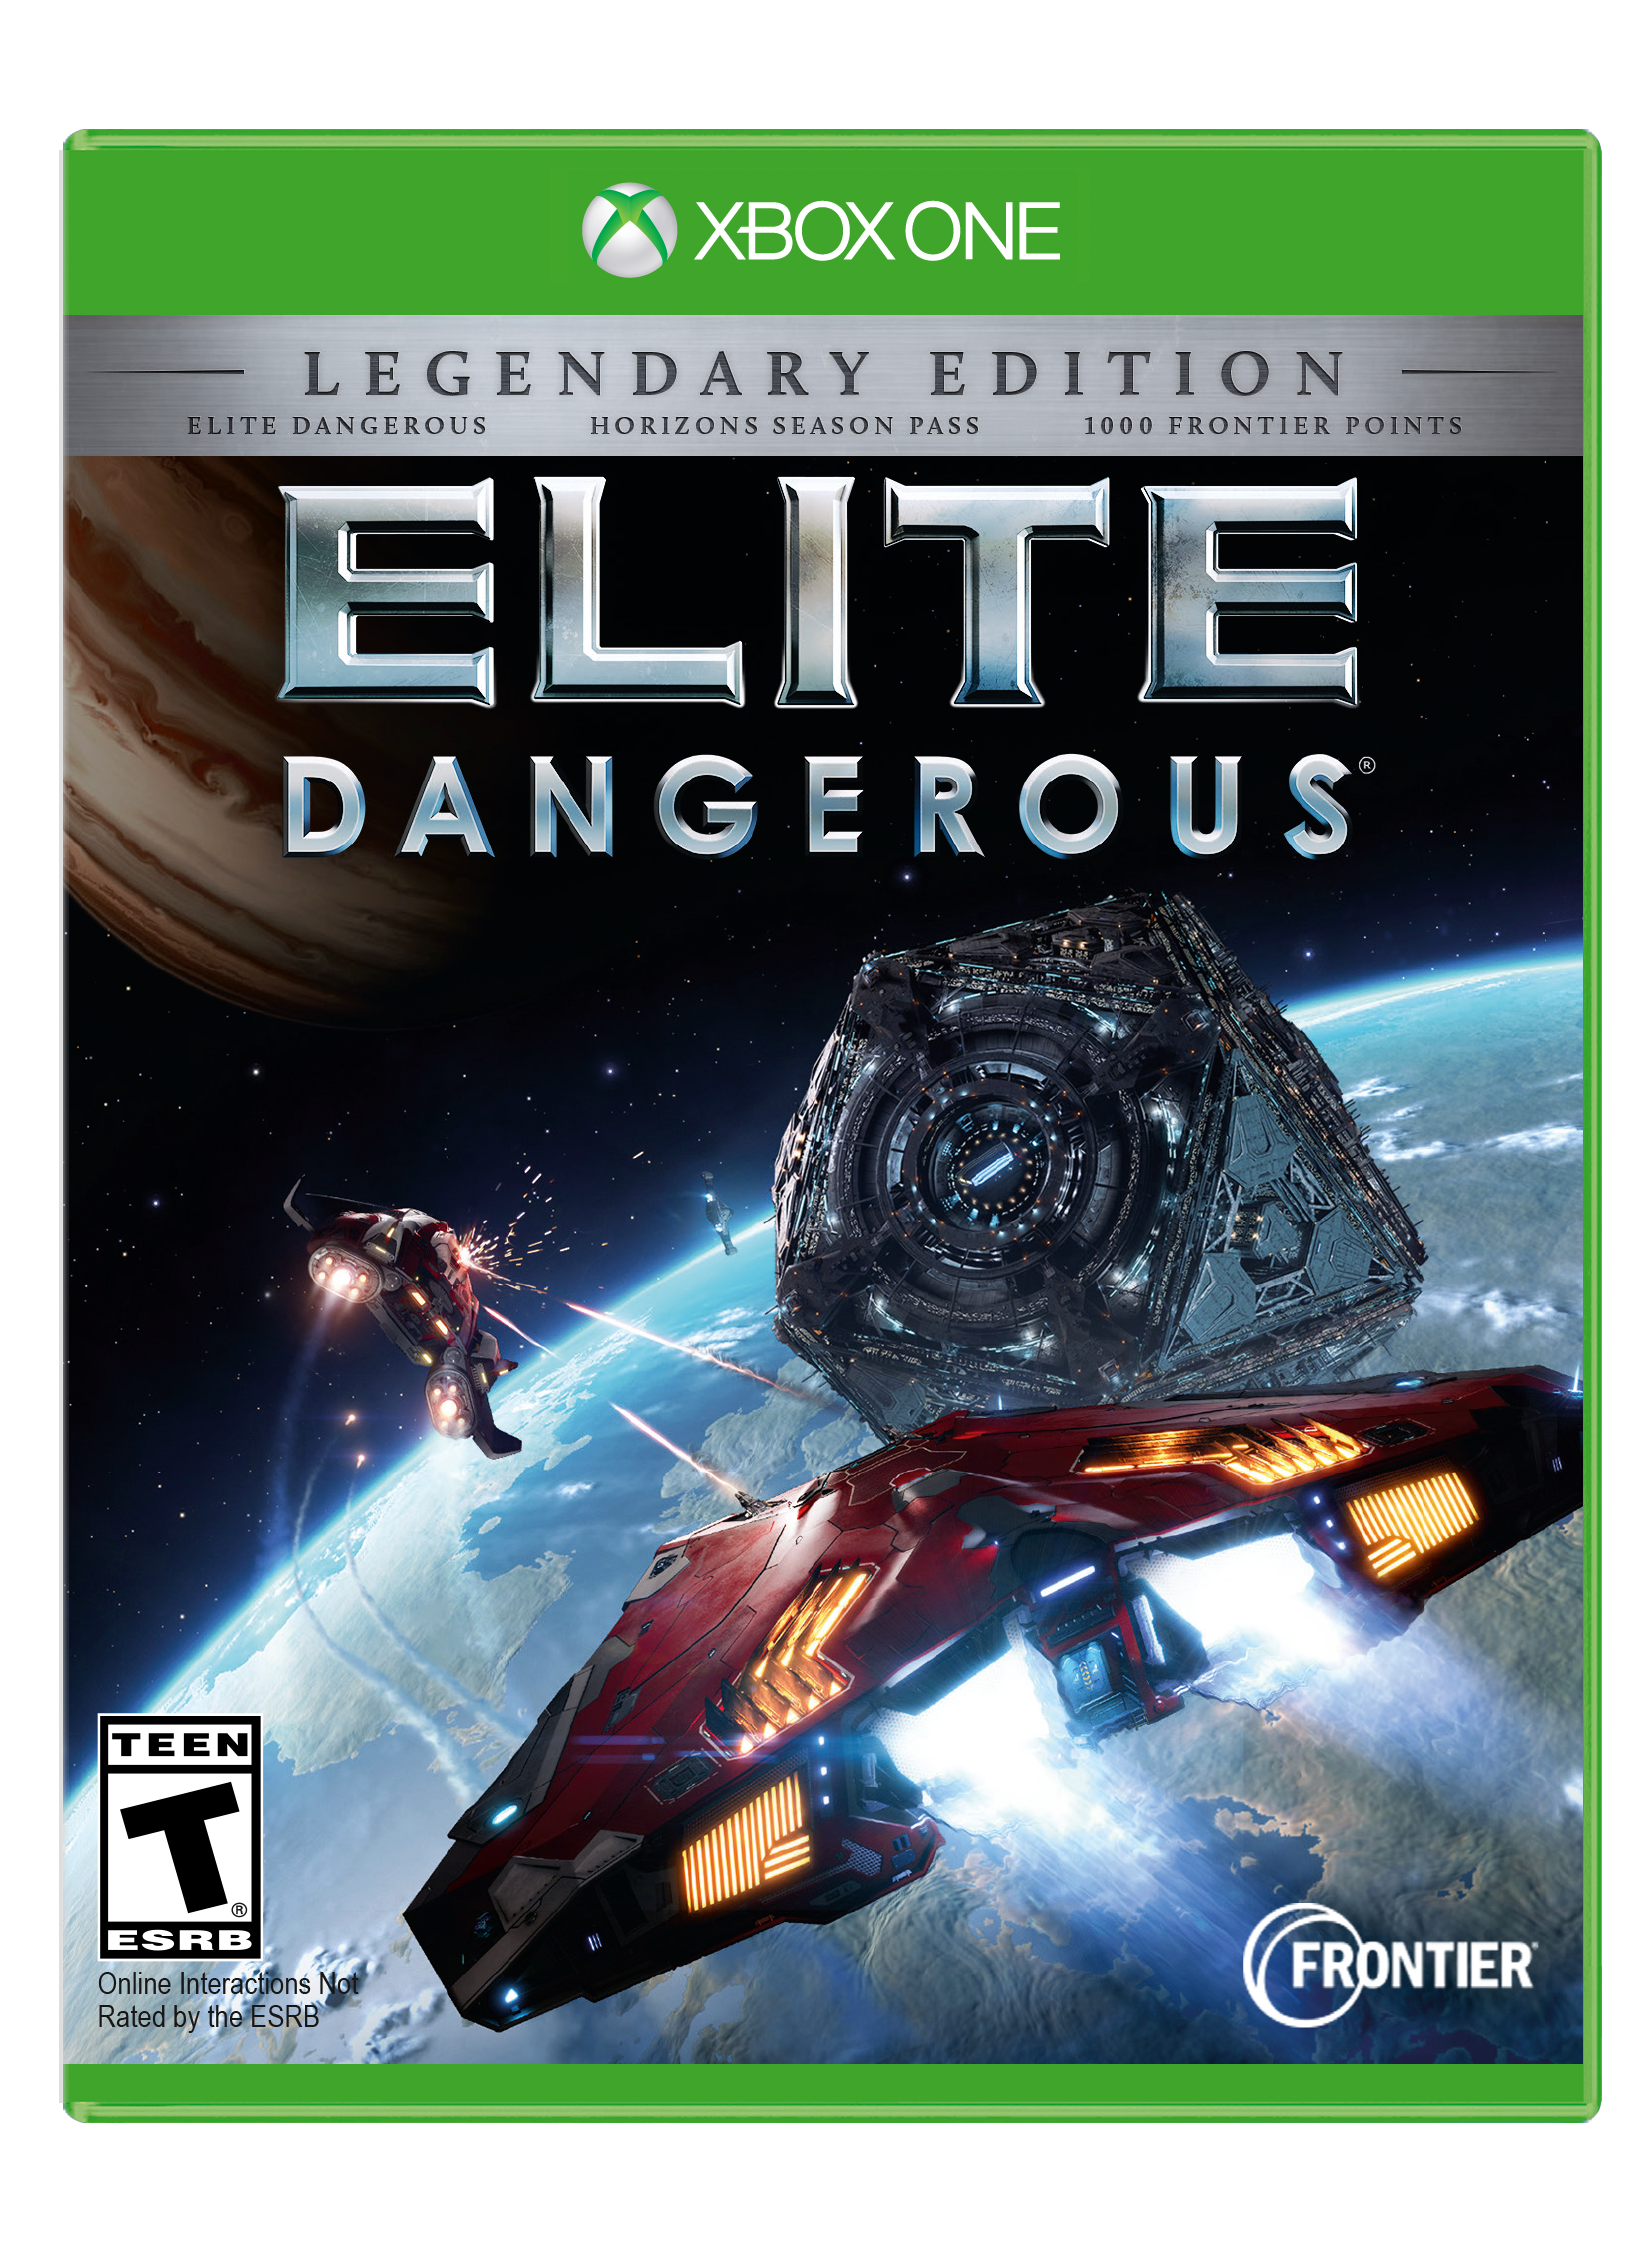 Head Into the Known With Elite: Dangerous - Xbox Wire